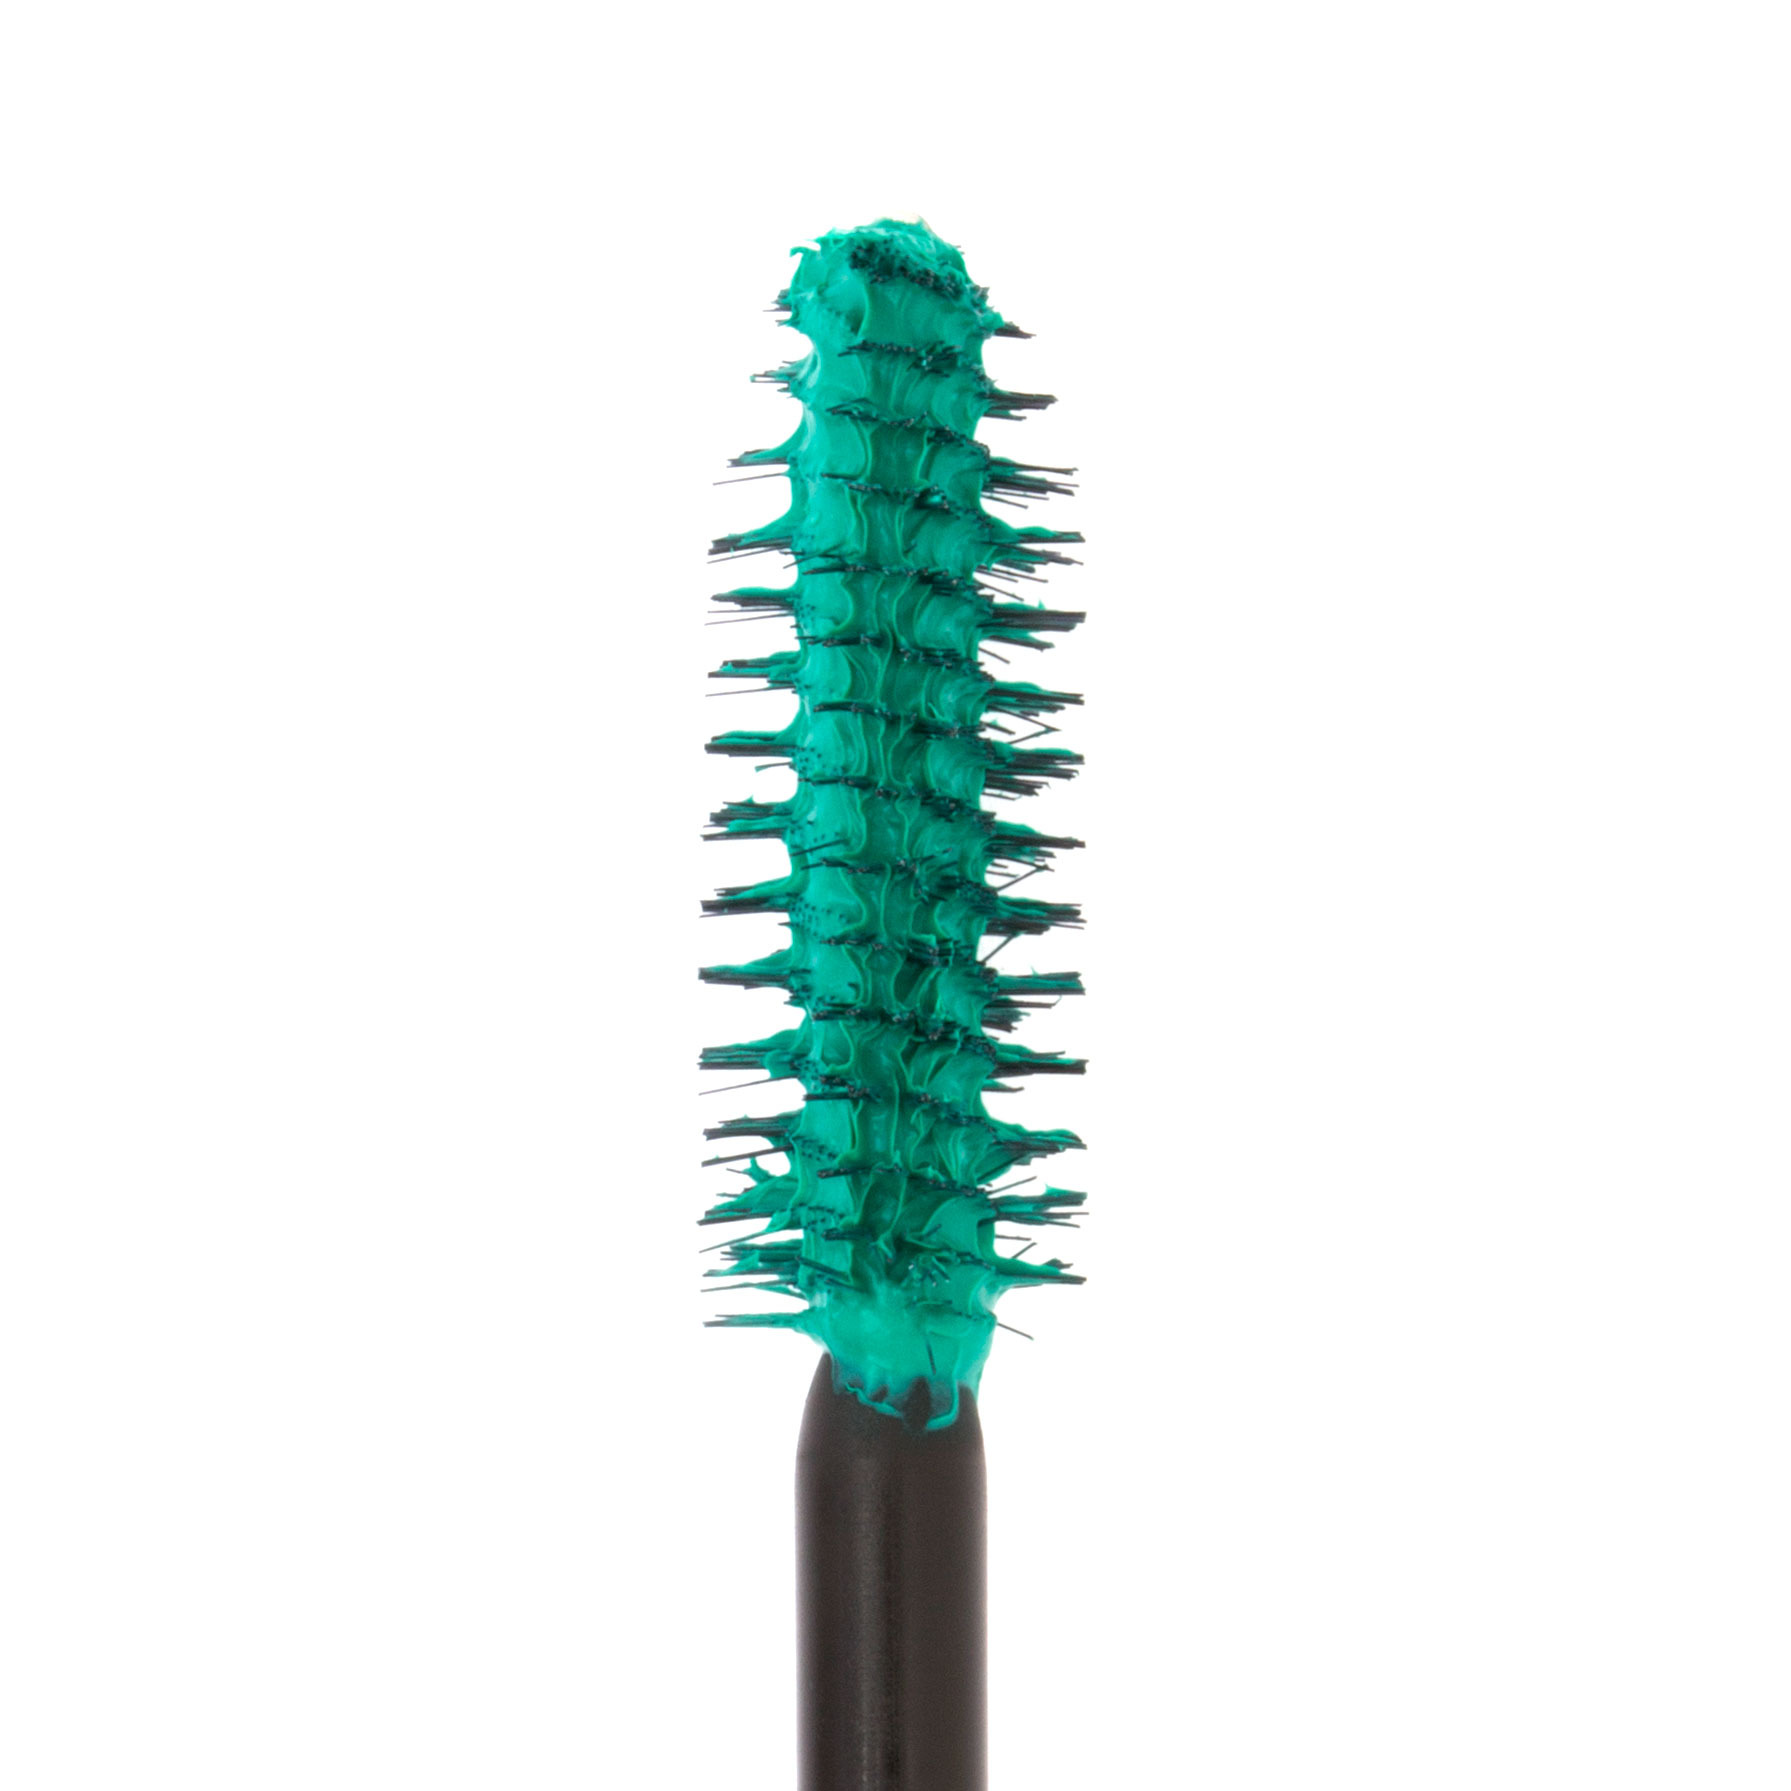 Inglot Cosmetics Colour Play Mascara in #02 Green